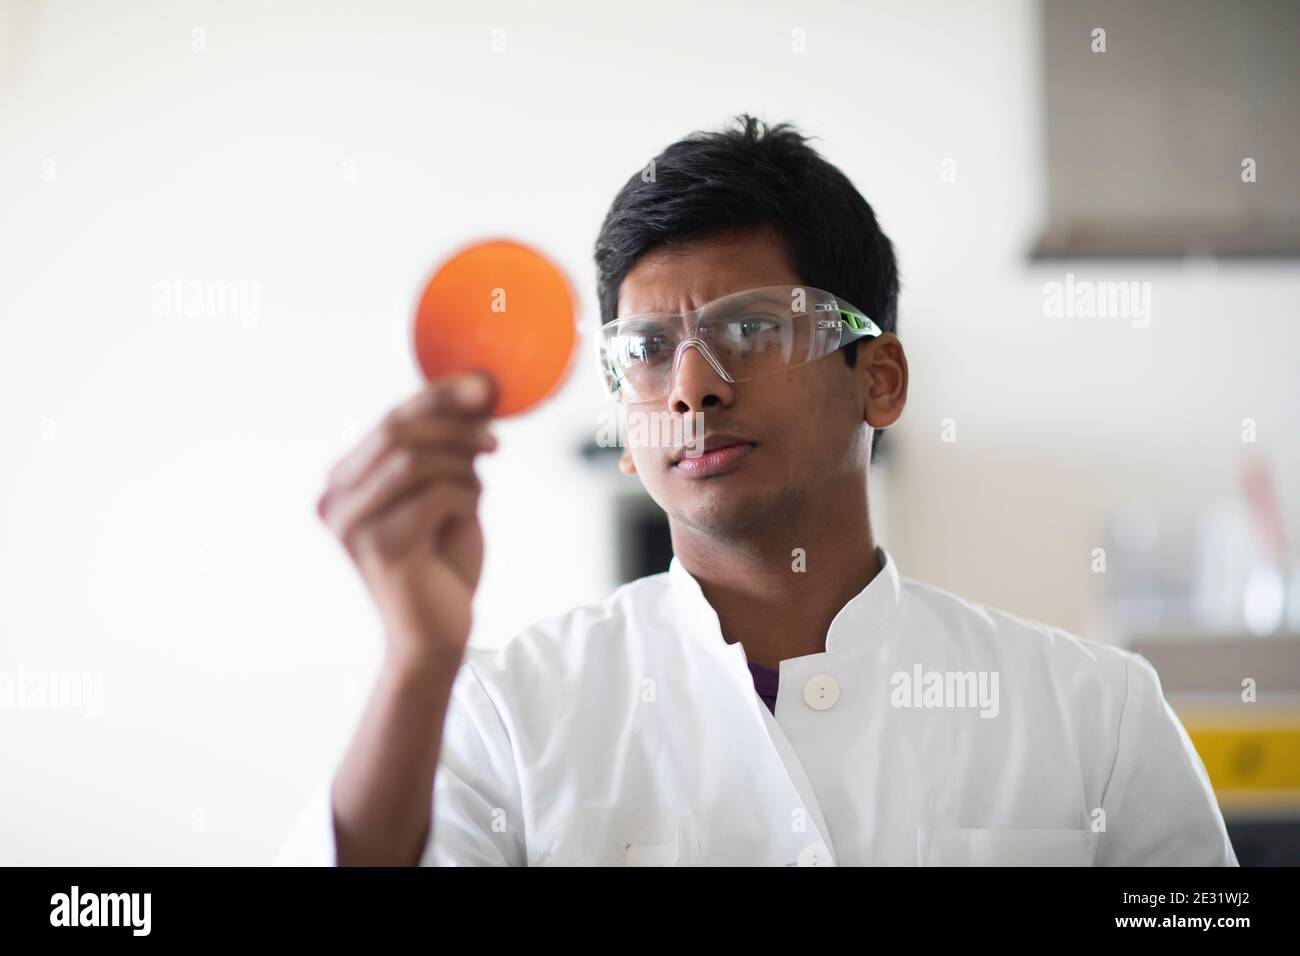 young man technician with labcoat and glasses working Stock Photo